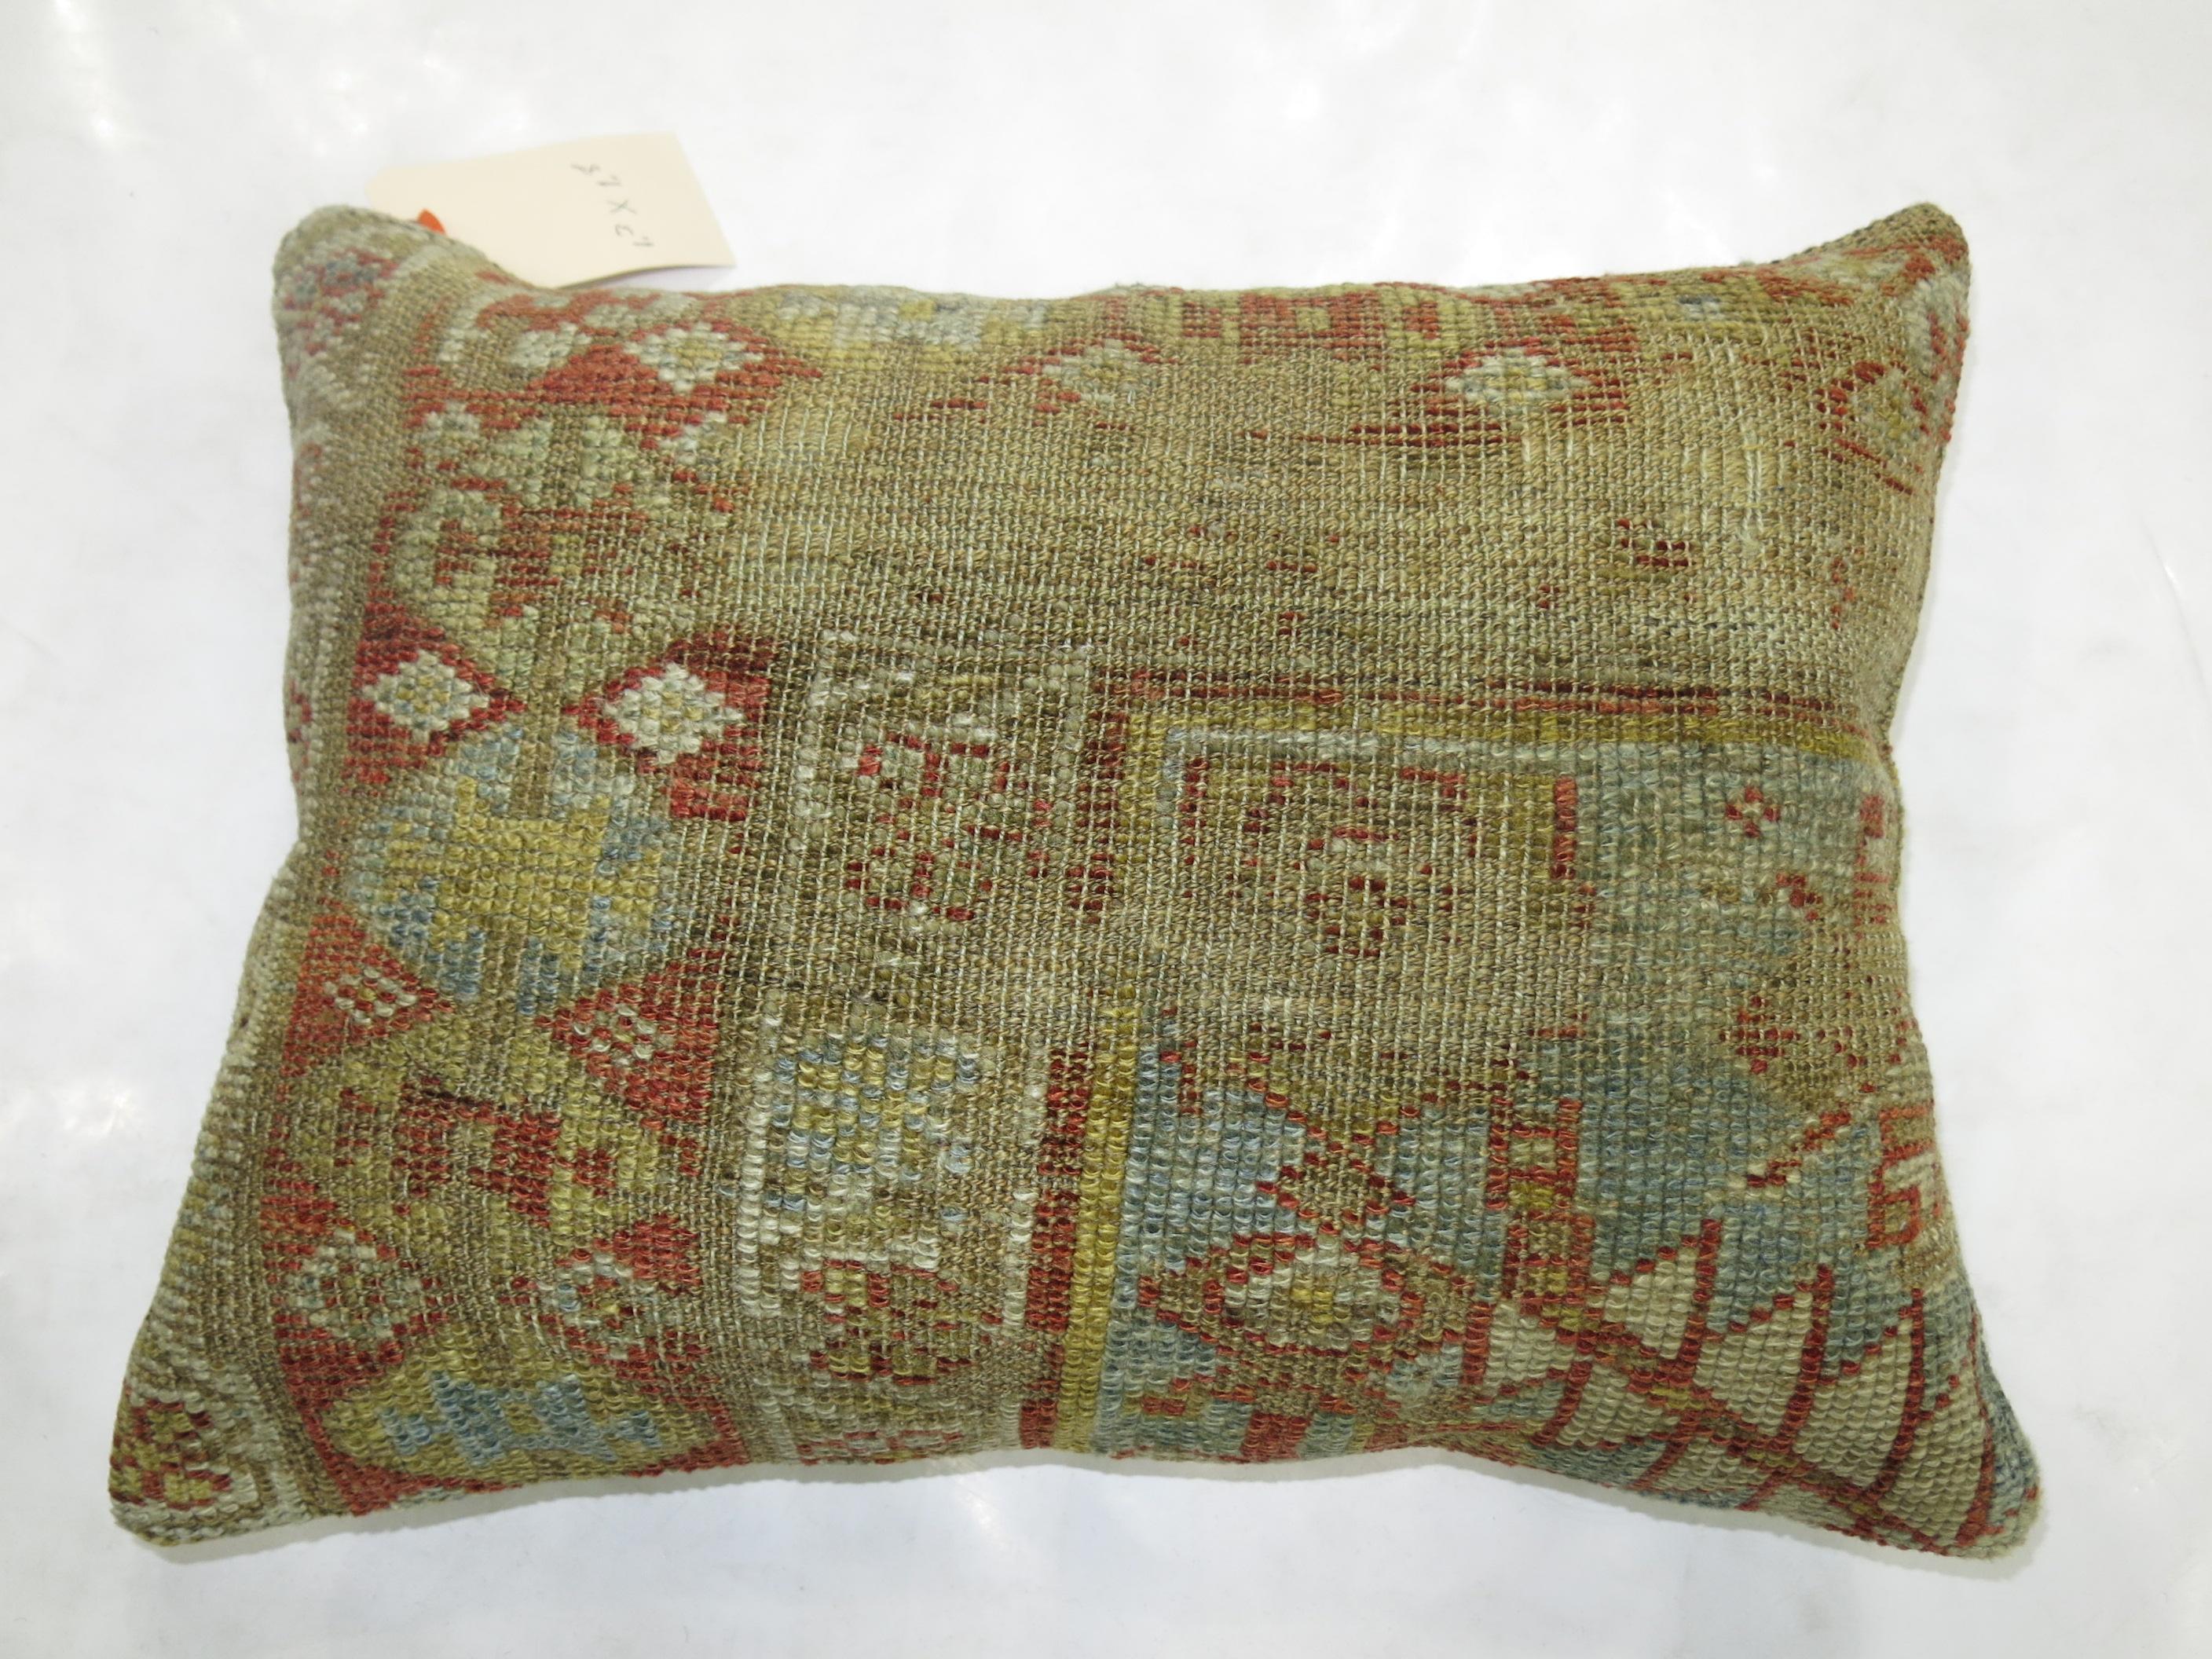 Pillow made from a Persian Malayer rug in dominant light blue and rust accents.

Measures: 15